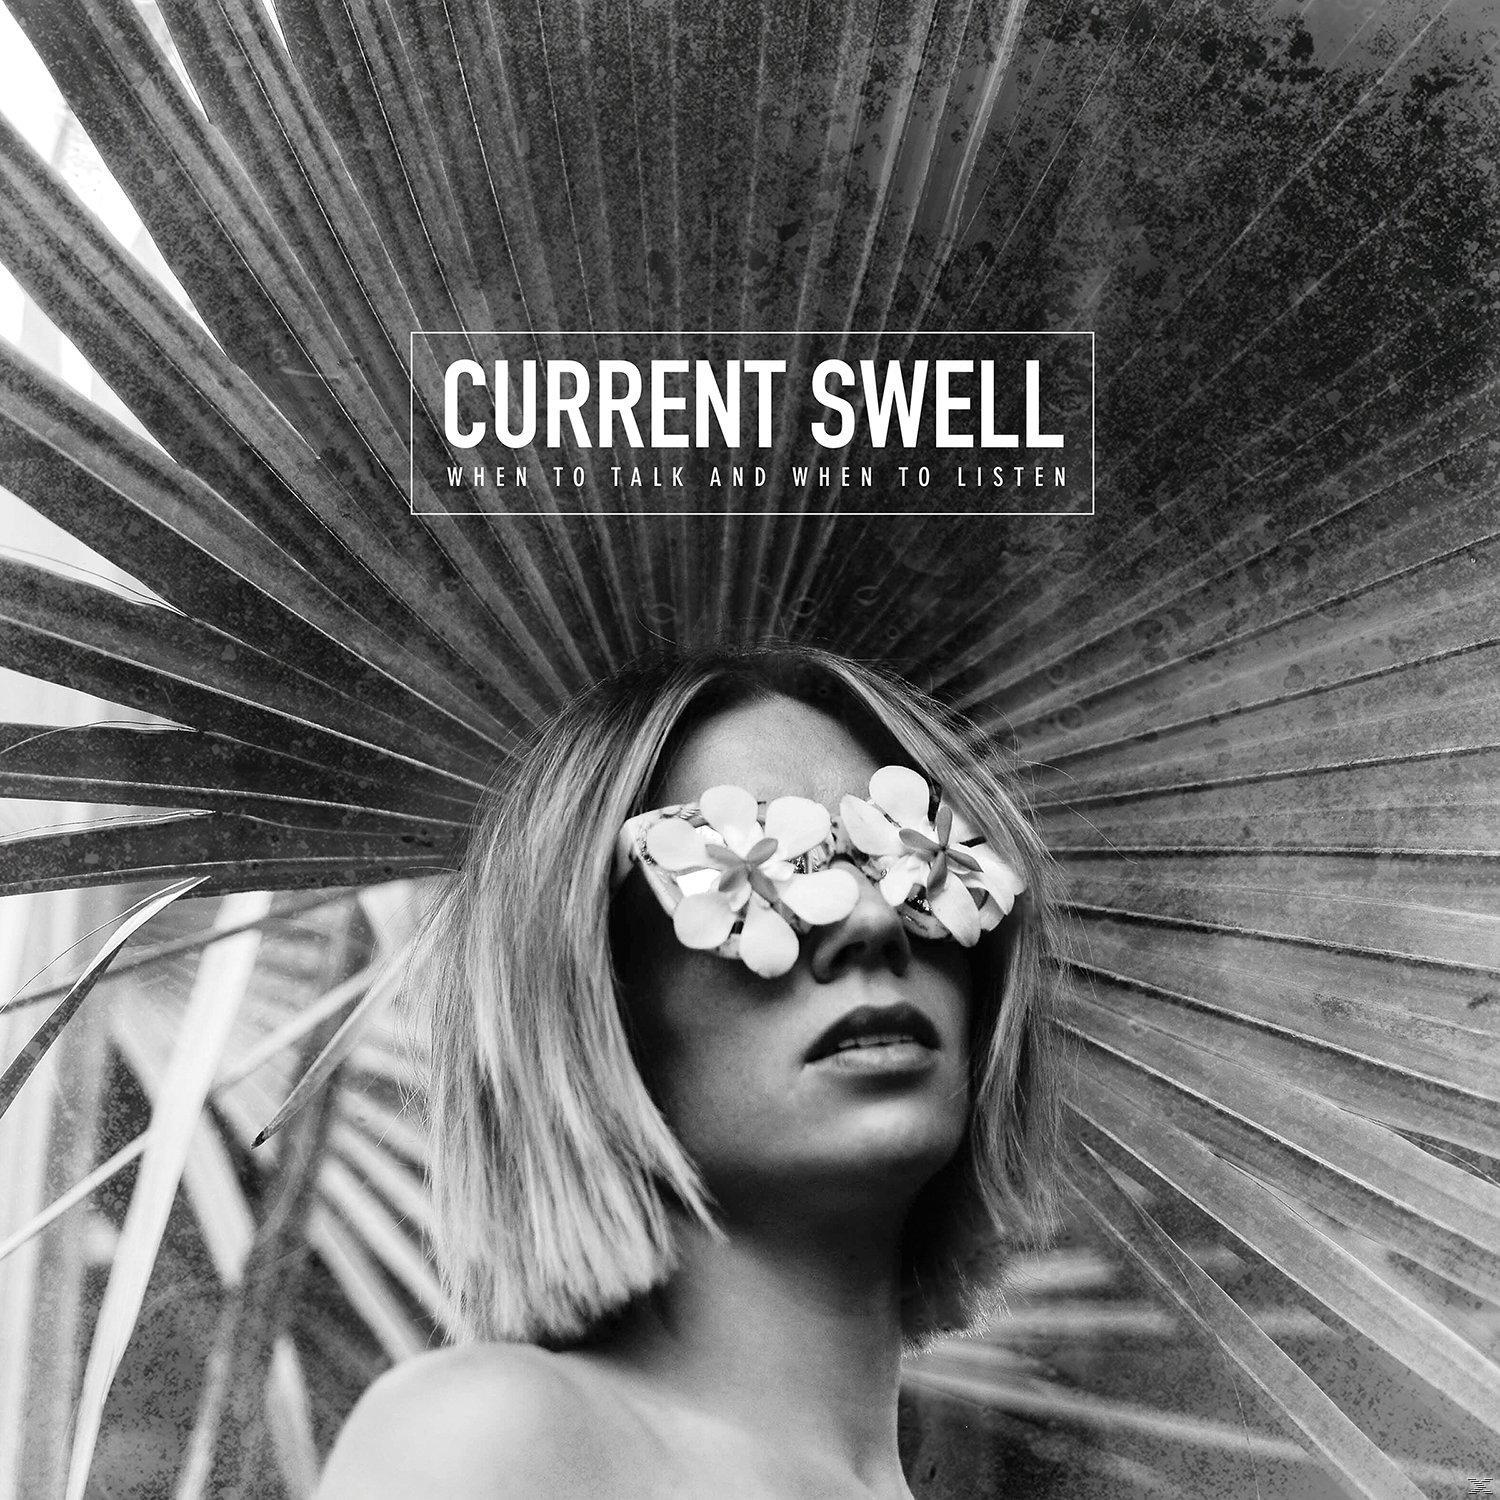 Current Swell Talk (Vinyl) to Listen - - to When and When